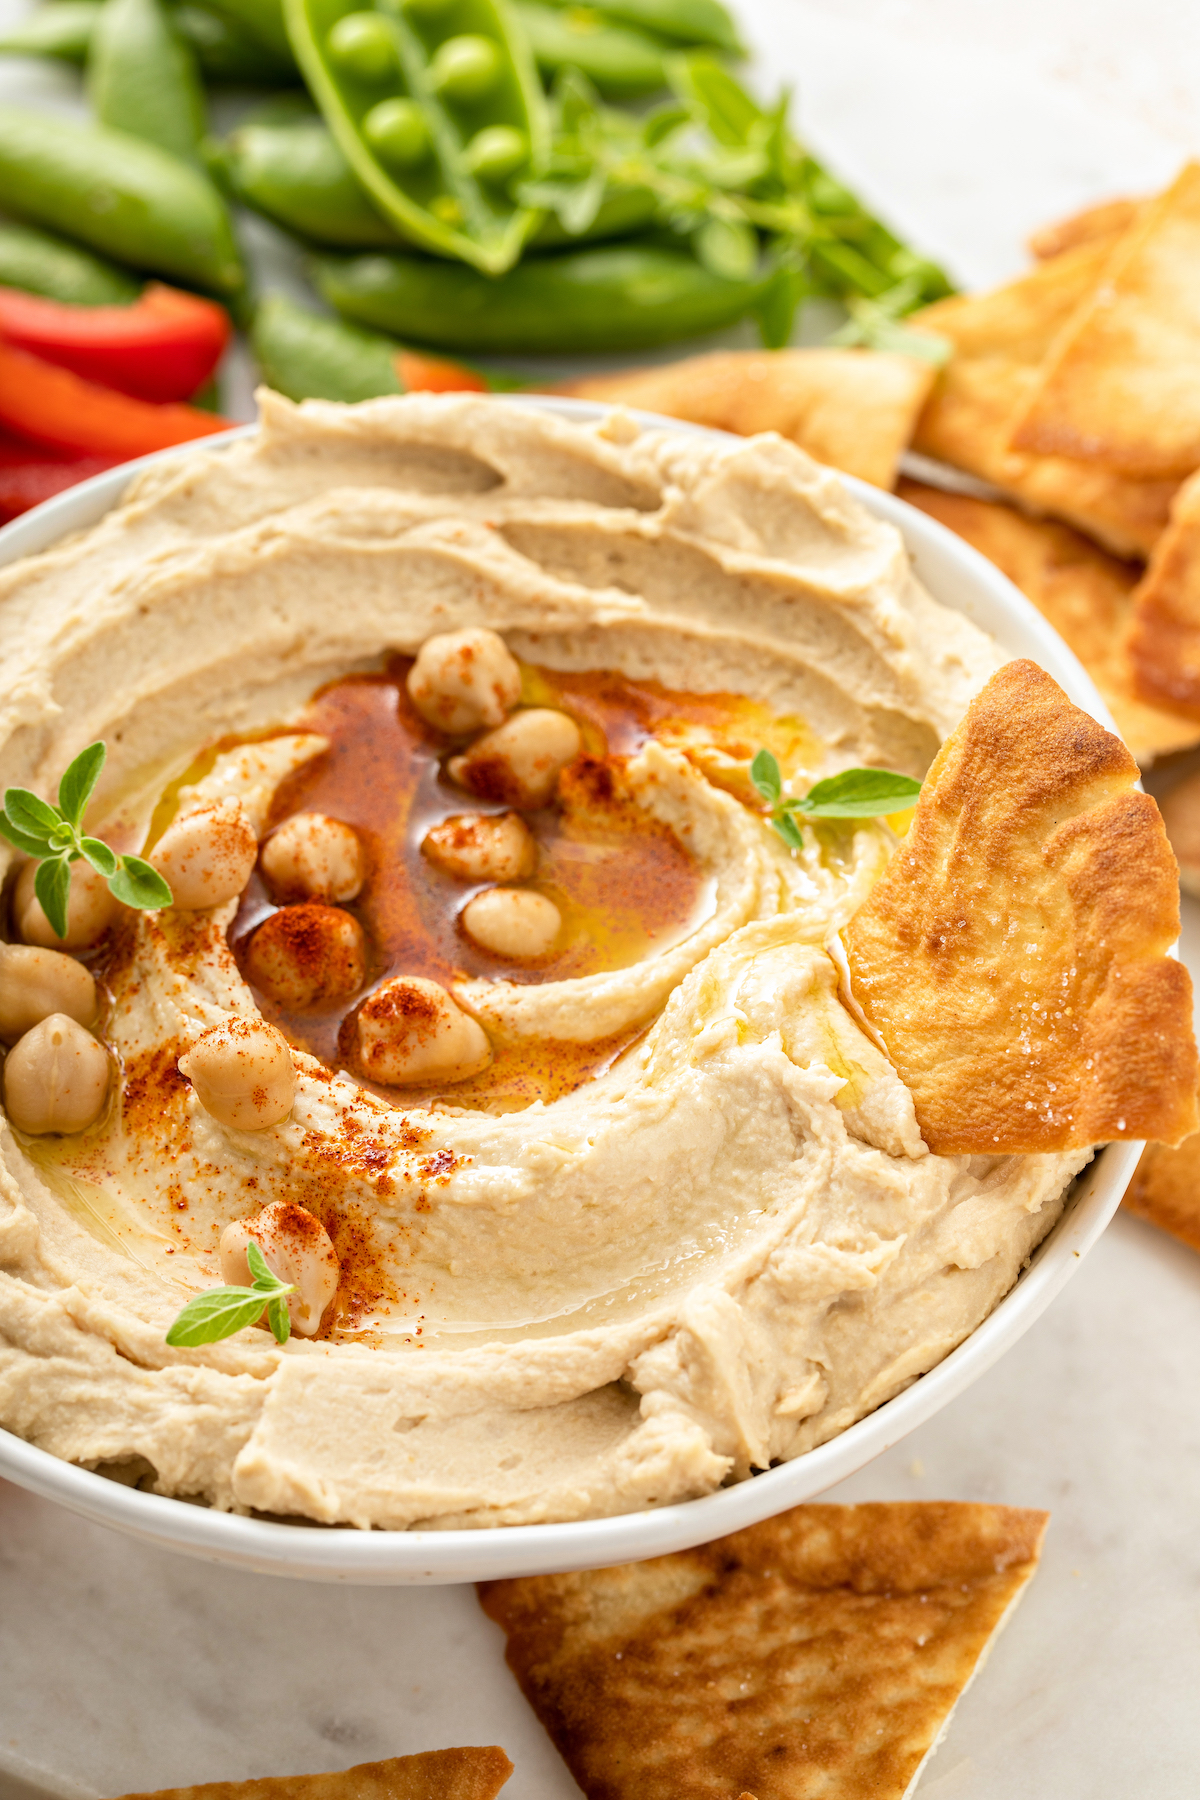 Creamy chickpea dip topped with olive oil, paprika, and extra chickpeas.